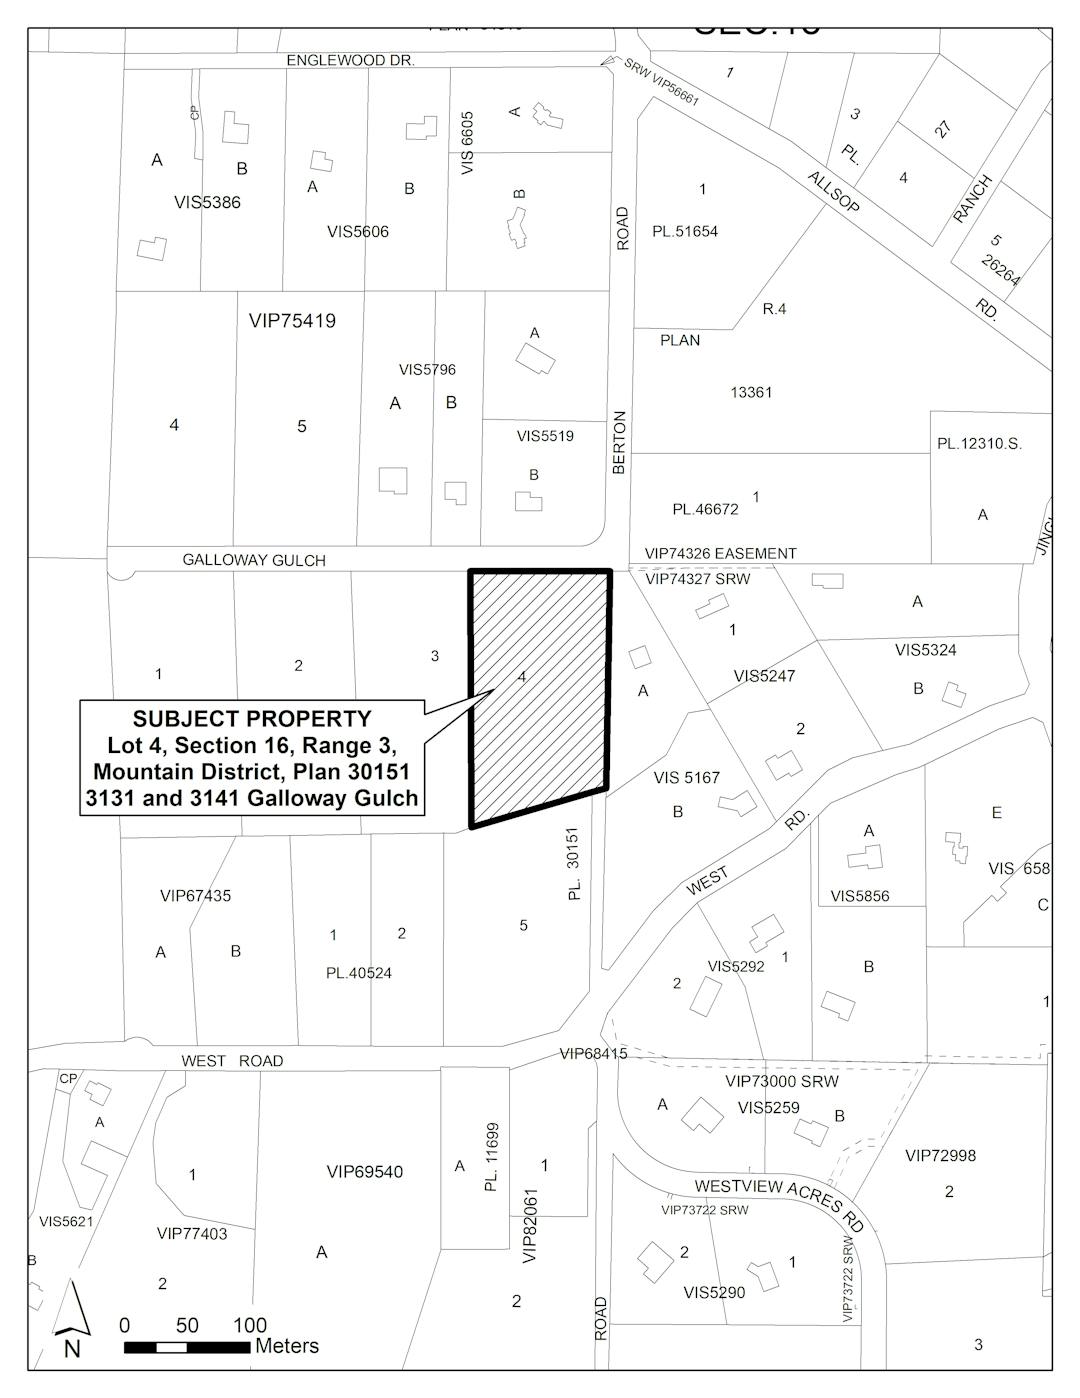 The RDN is currently looking for your input on zoning amendment application PL2020-126.